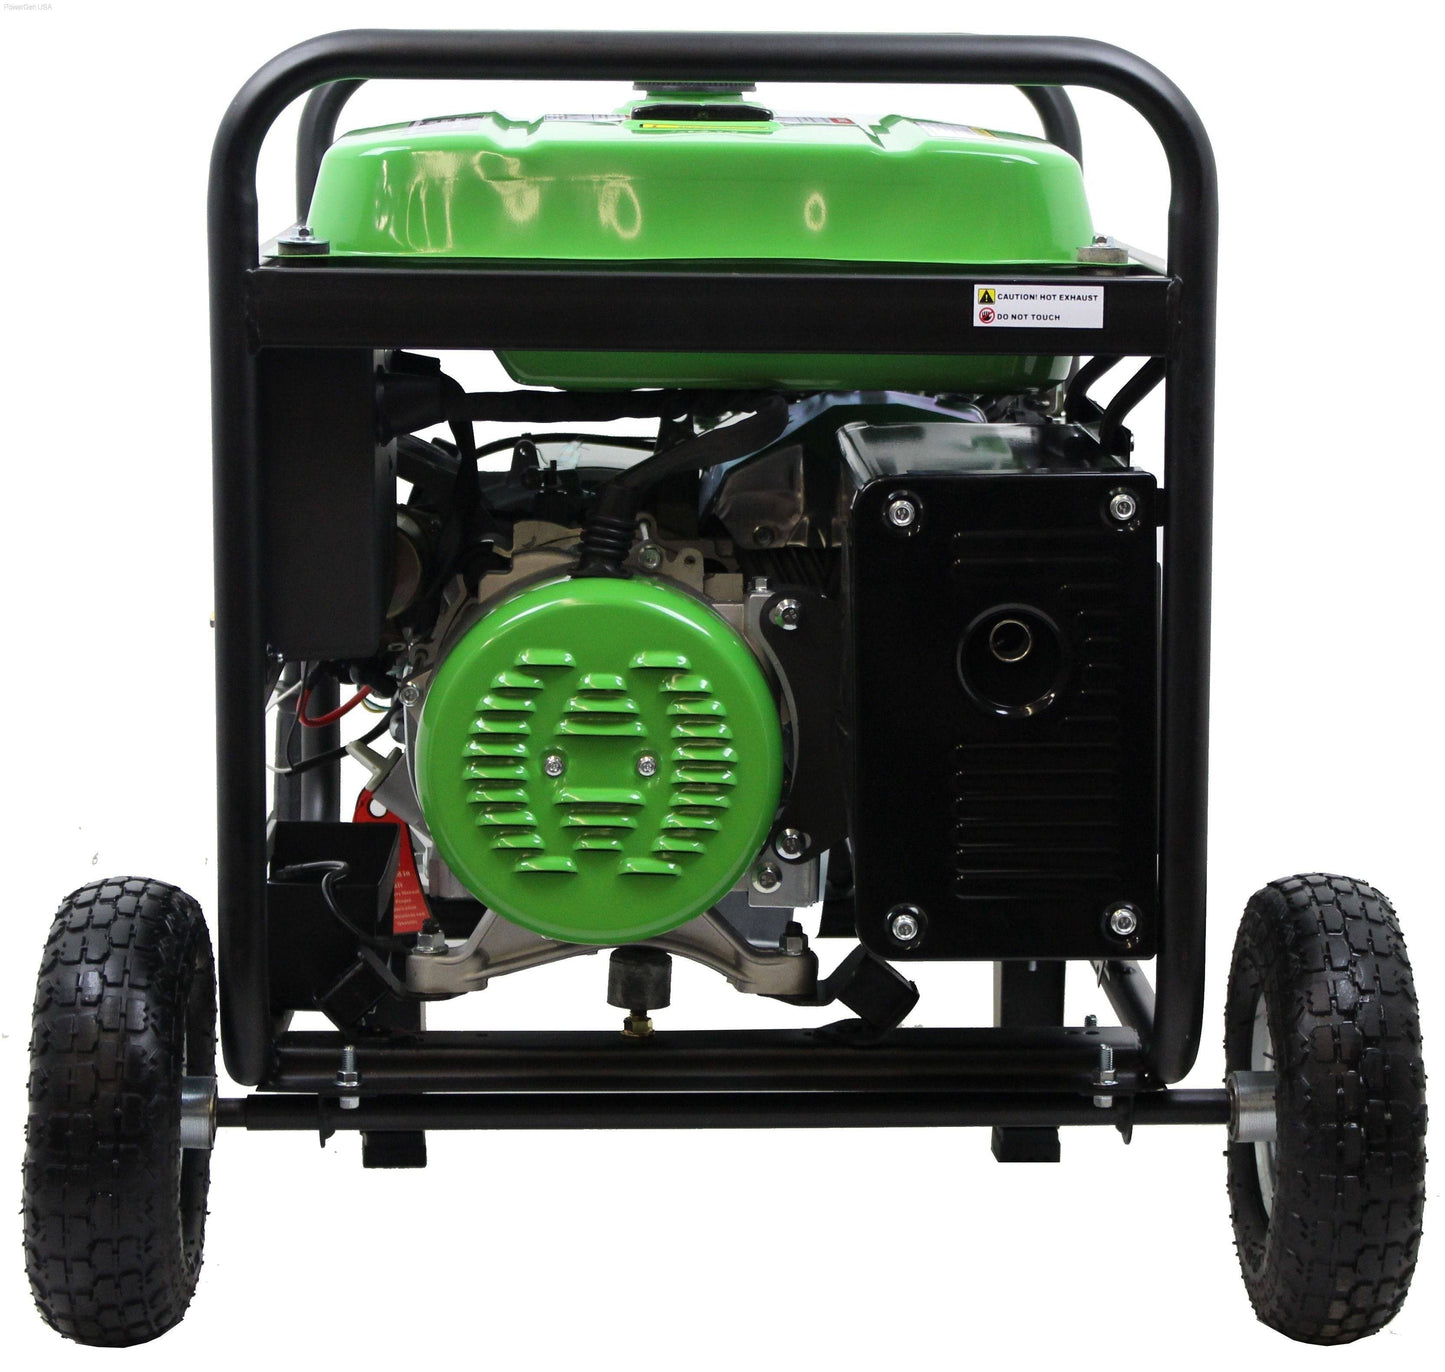 Gas Generators - LIFAN Power USA 6600-Watt 13hp Gas Powered Portable Generator With Electric And Recoil Start